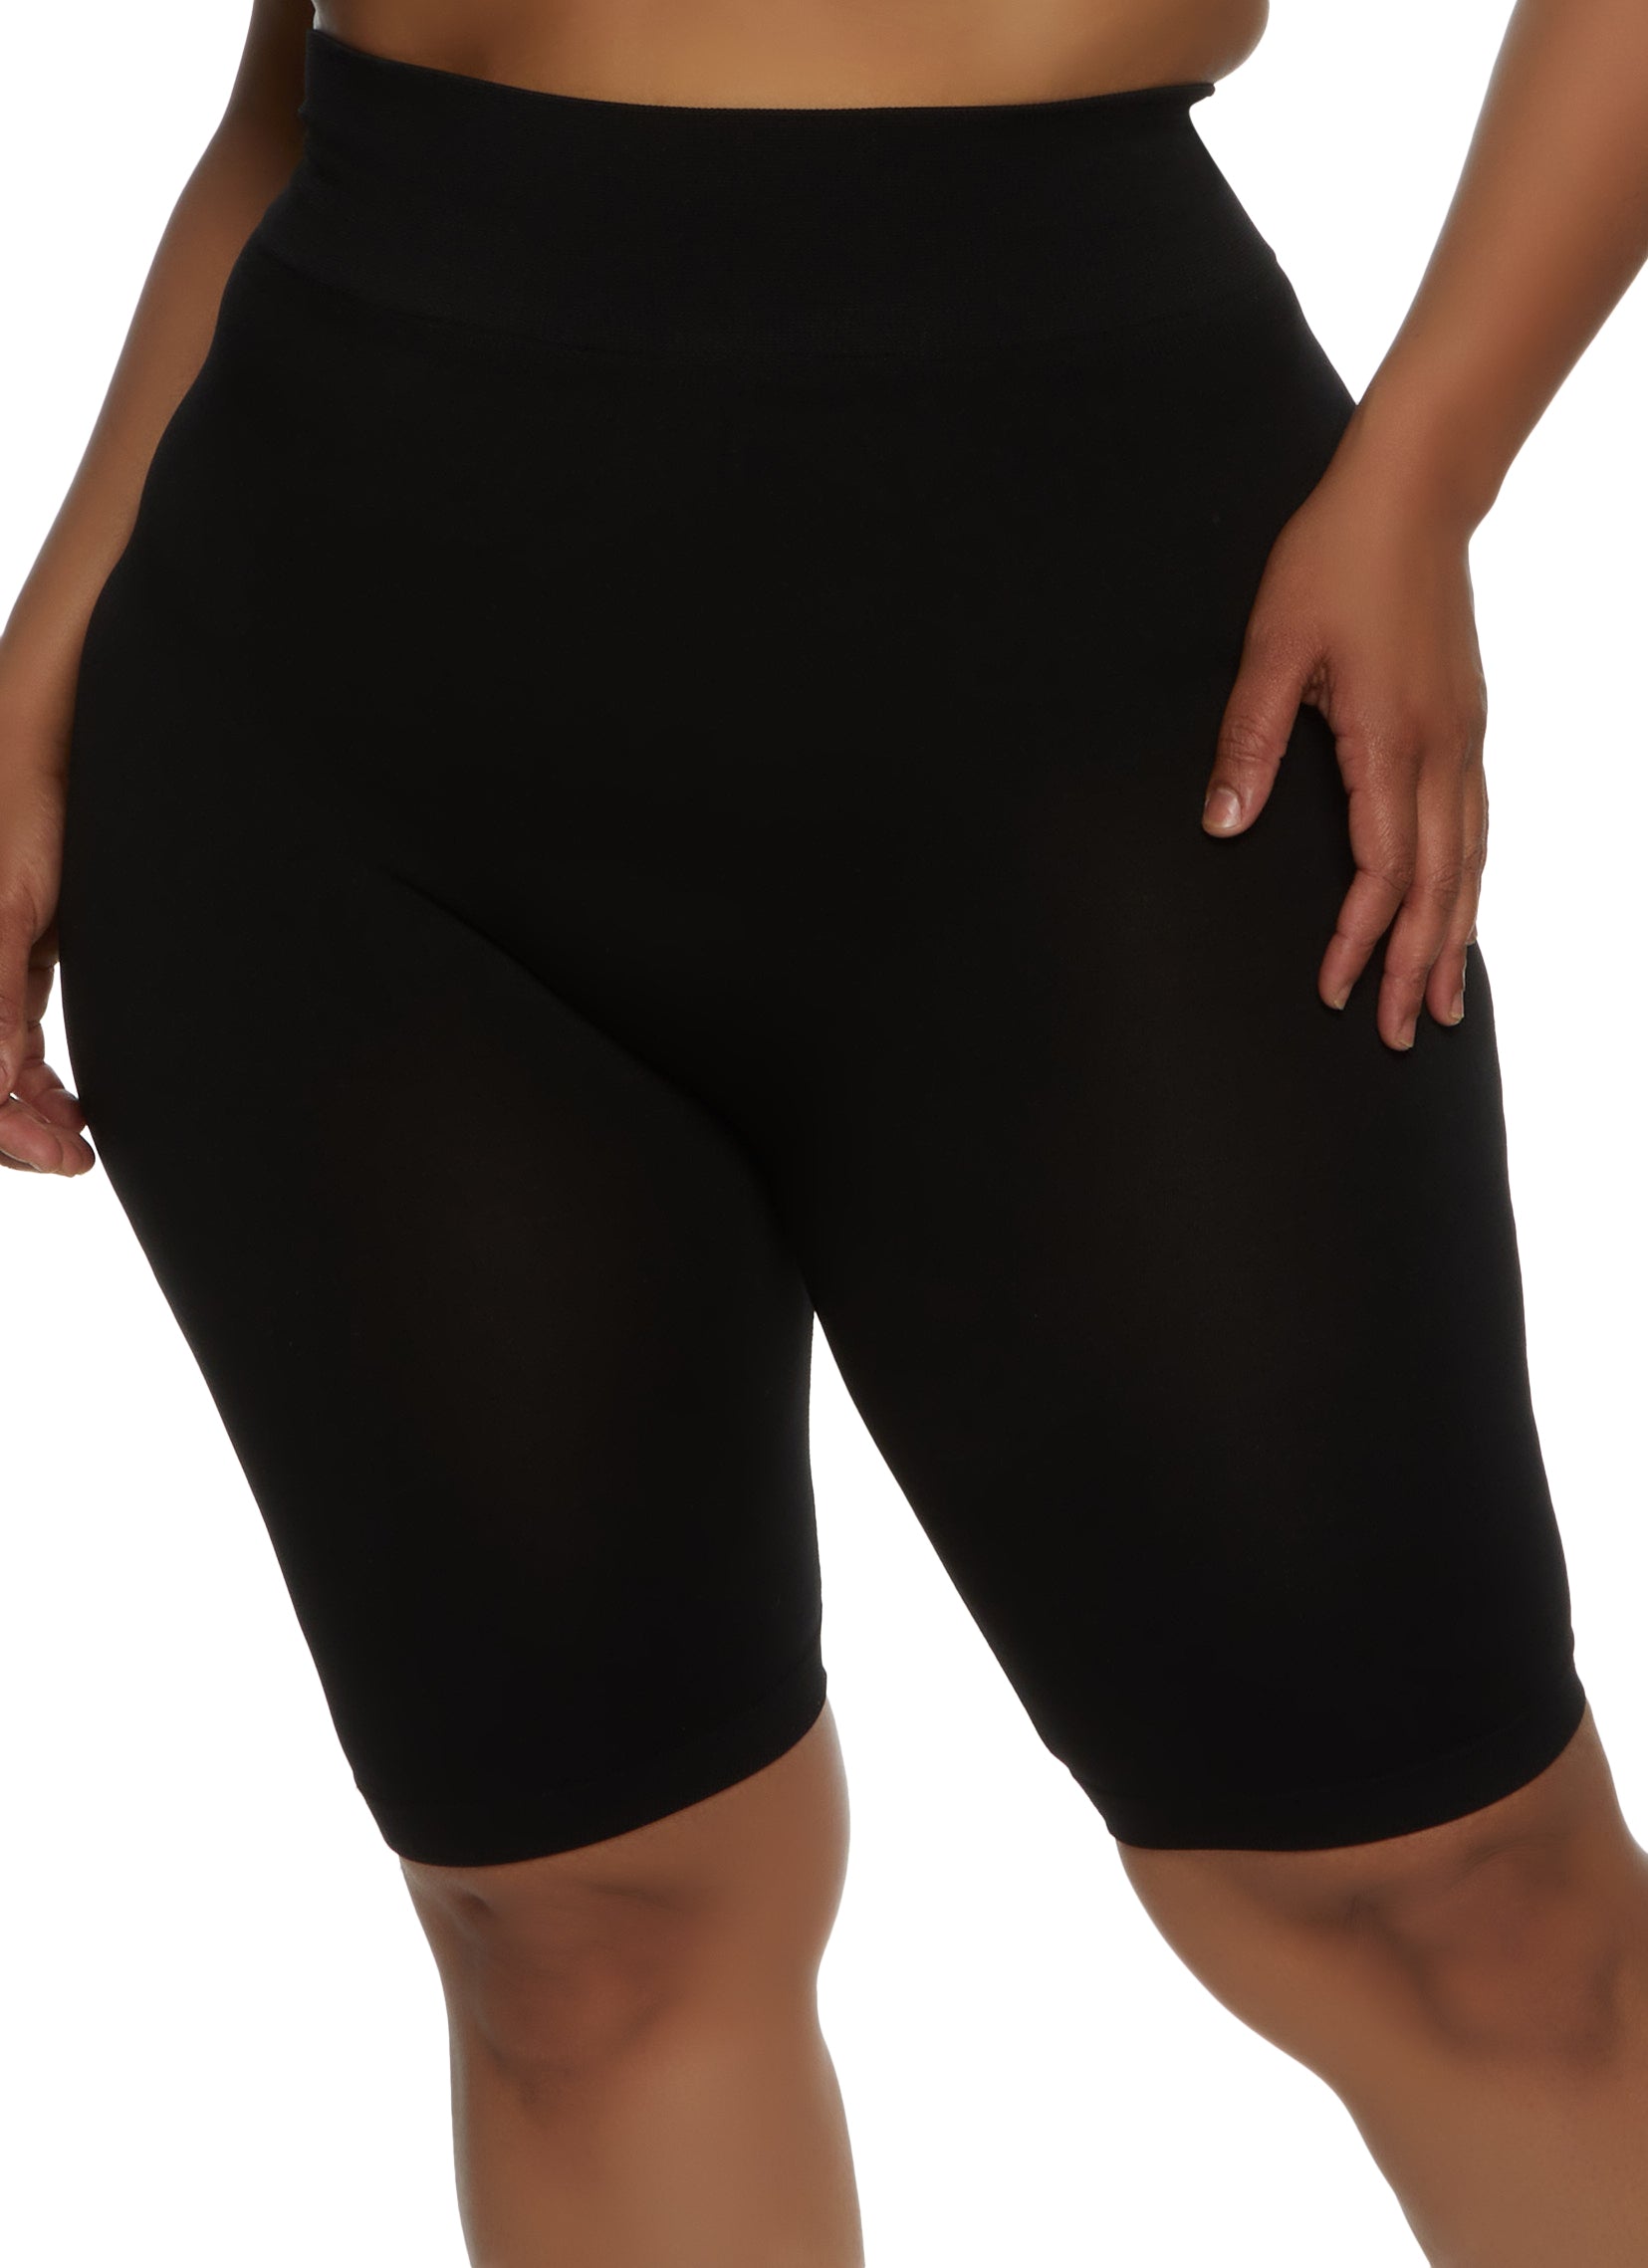 Plus Size Biker Shorts, Everyday Low Prices